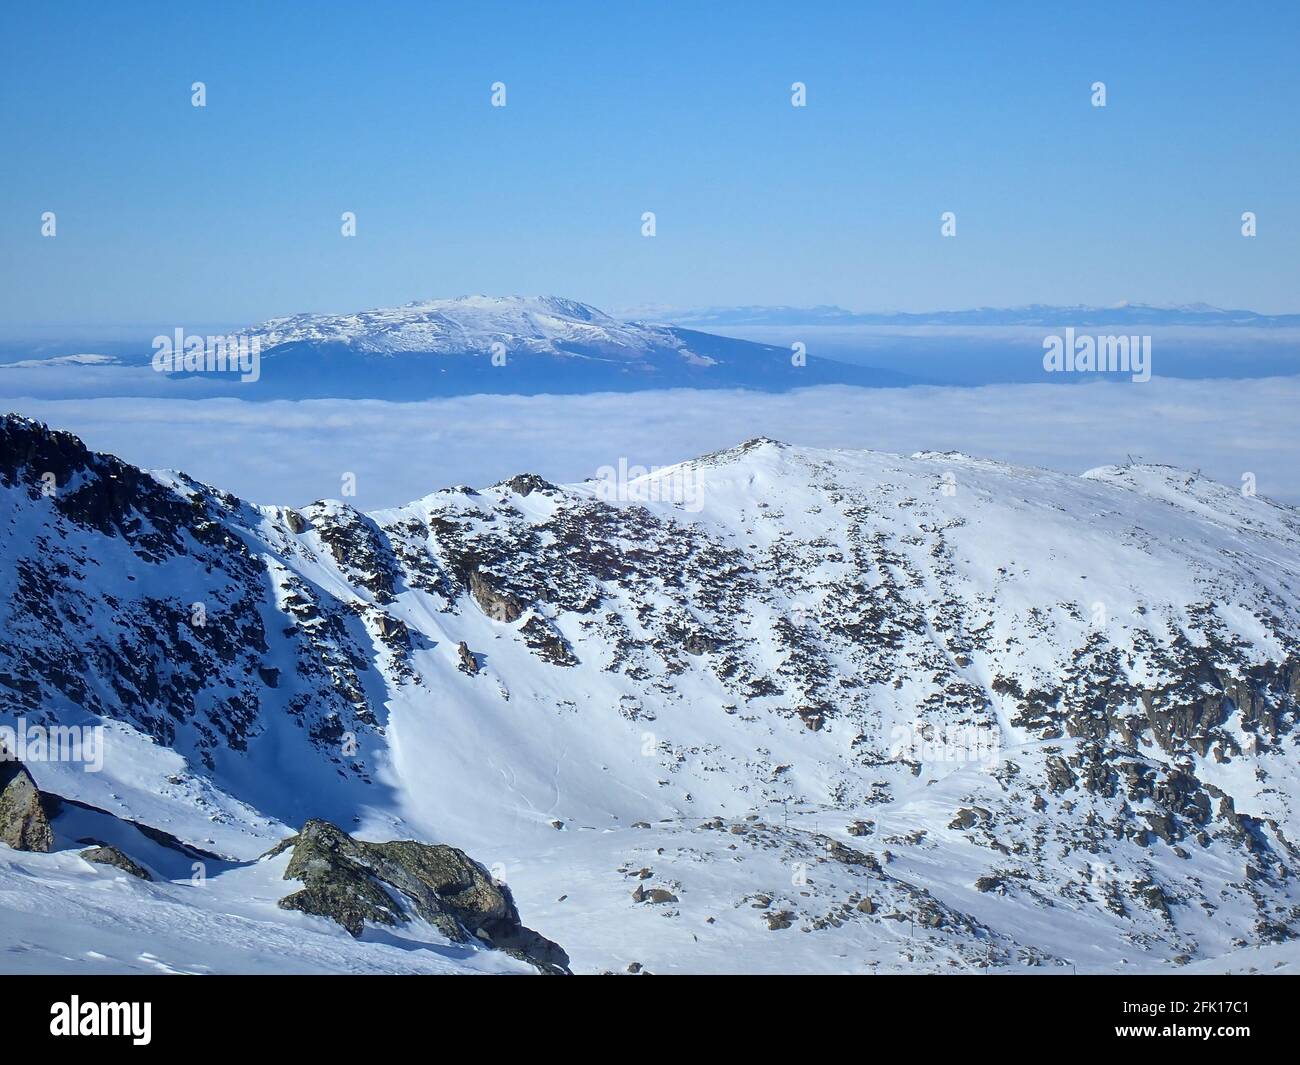 A distant view of Vitosha mountain, Bulgaria, as seen across a sea of clouds from the slopes of Musala peak, Rila mountains, Bulgaria, in winter Stock Photo